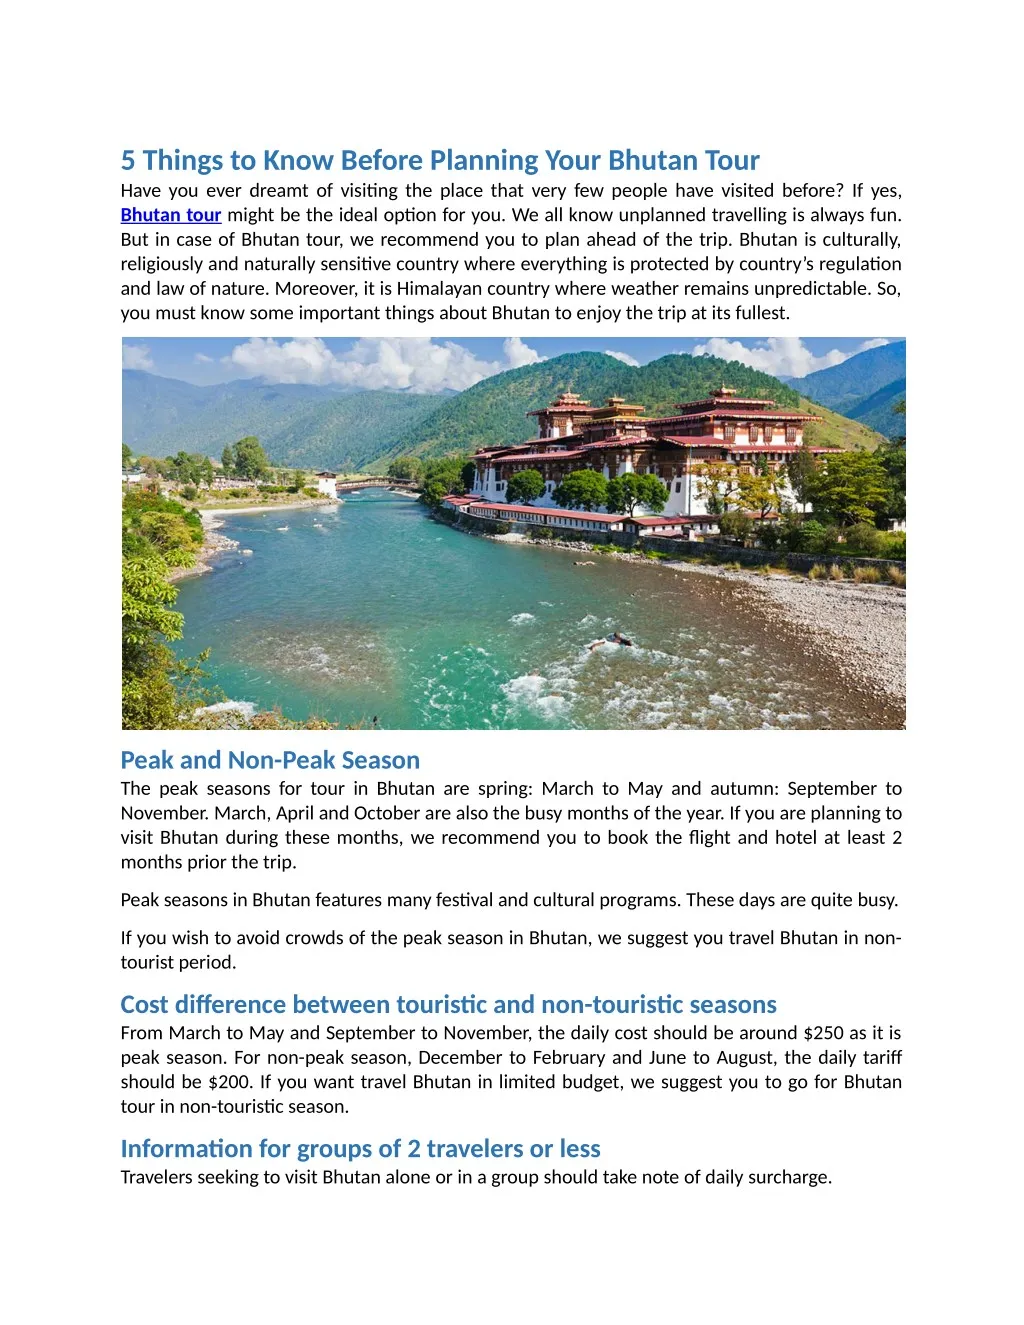 5 things to know before planning your bhutan tour